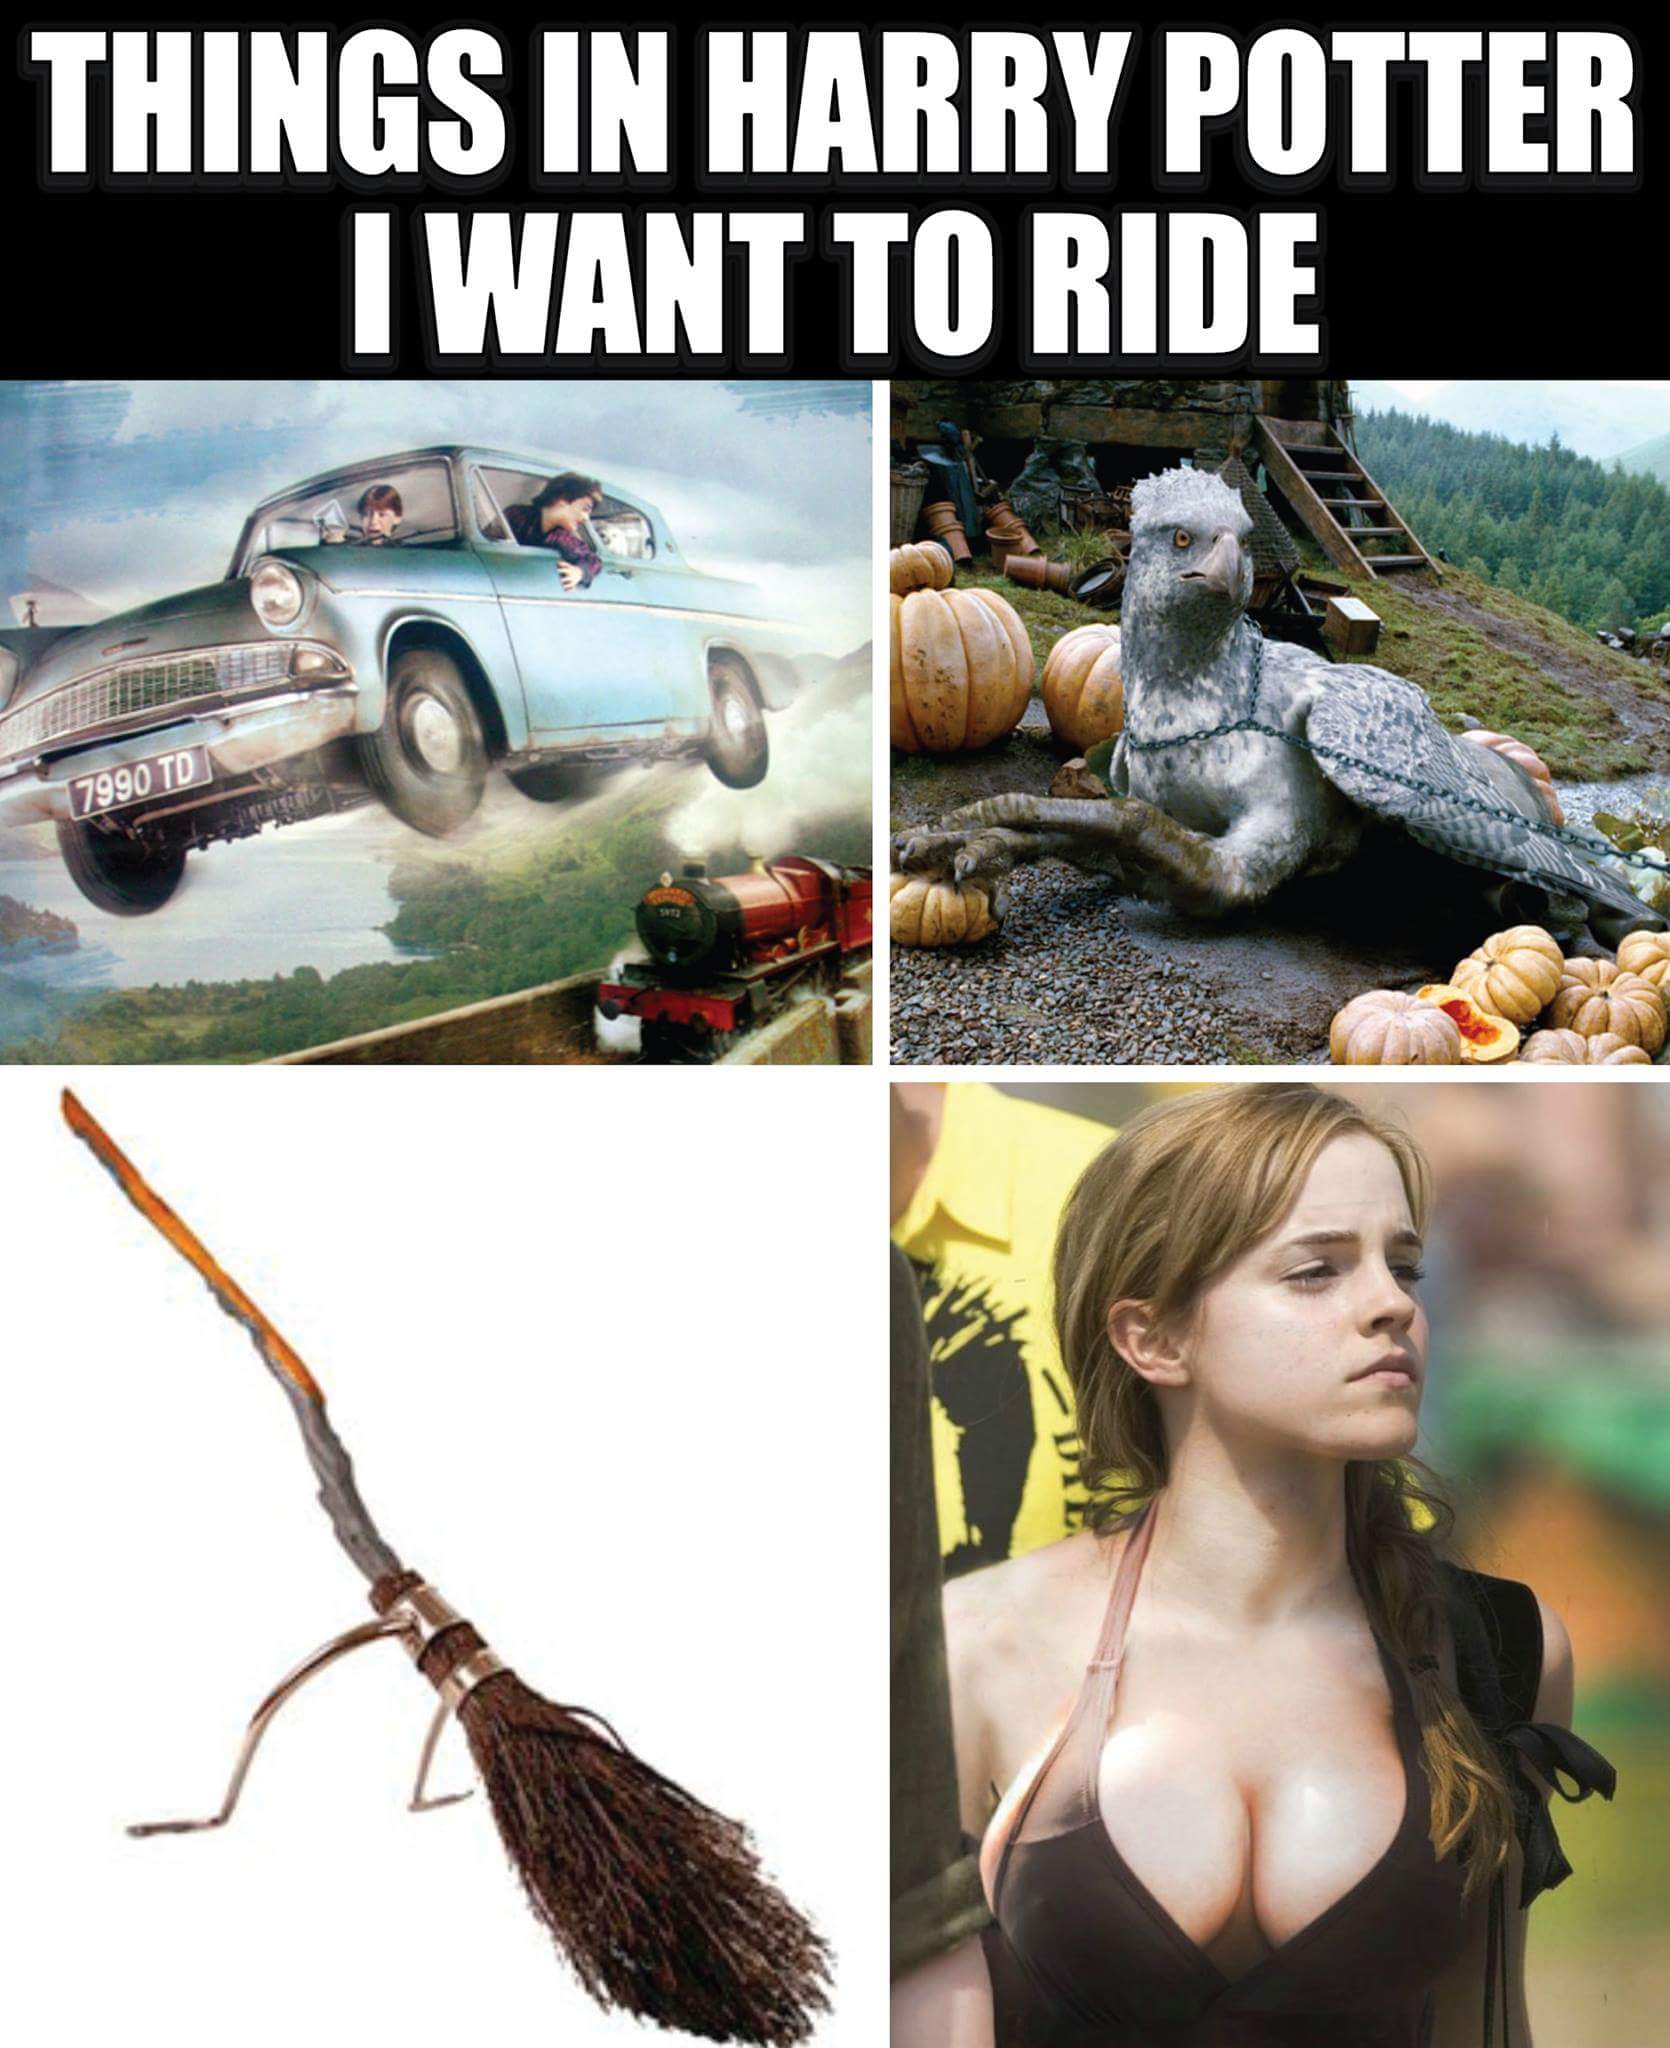 memes - 4 things meme - Things In Harry Potter I Want To Ride 7990 Td